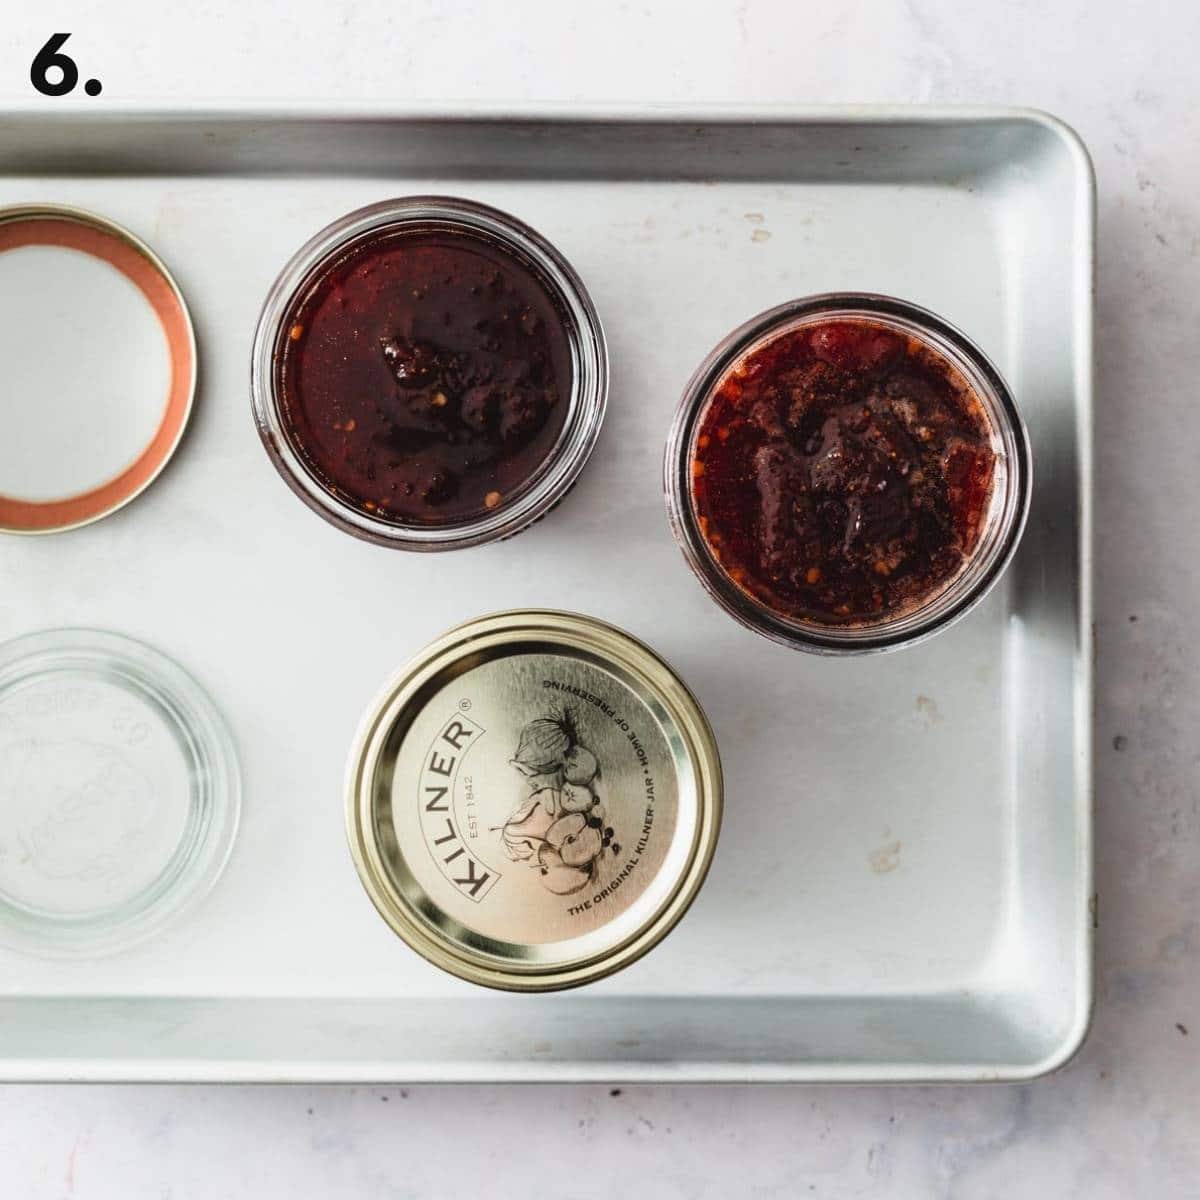 A tray with jars of jam laid out.